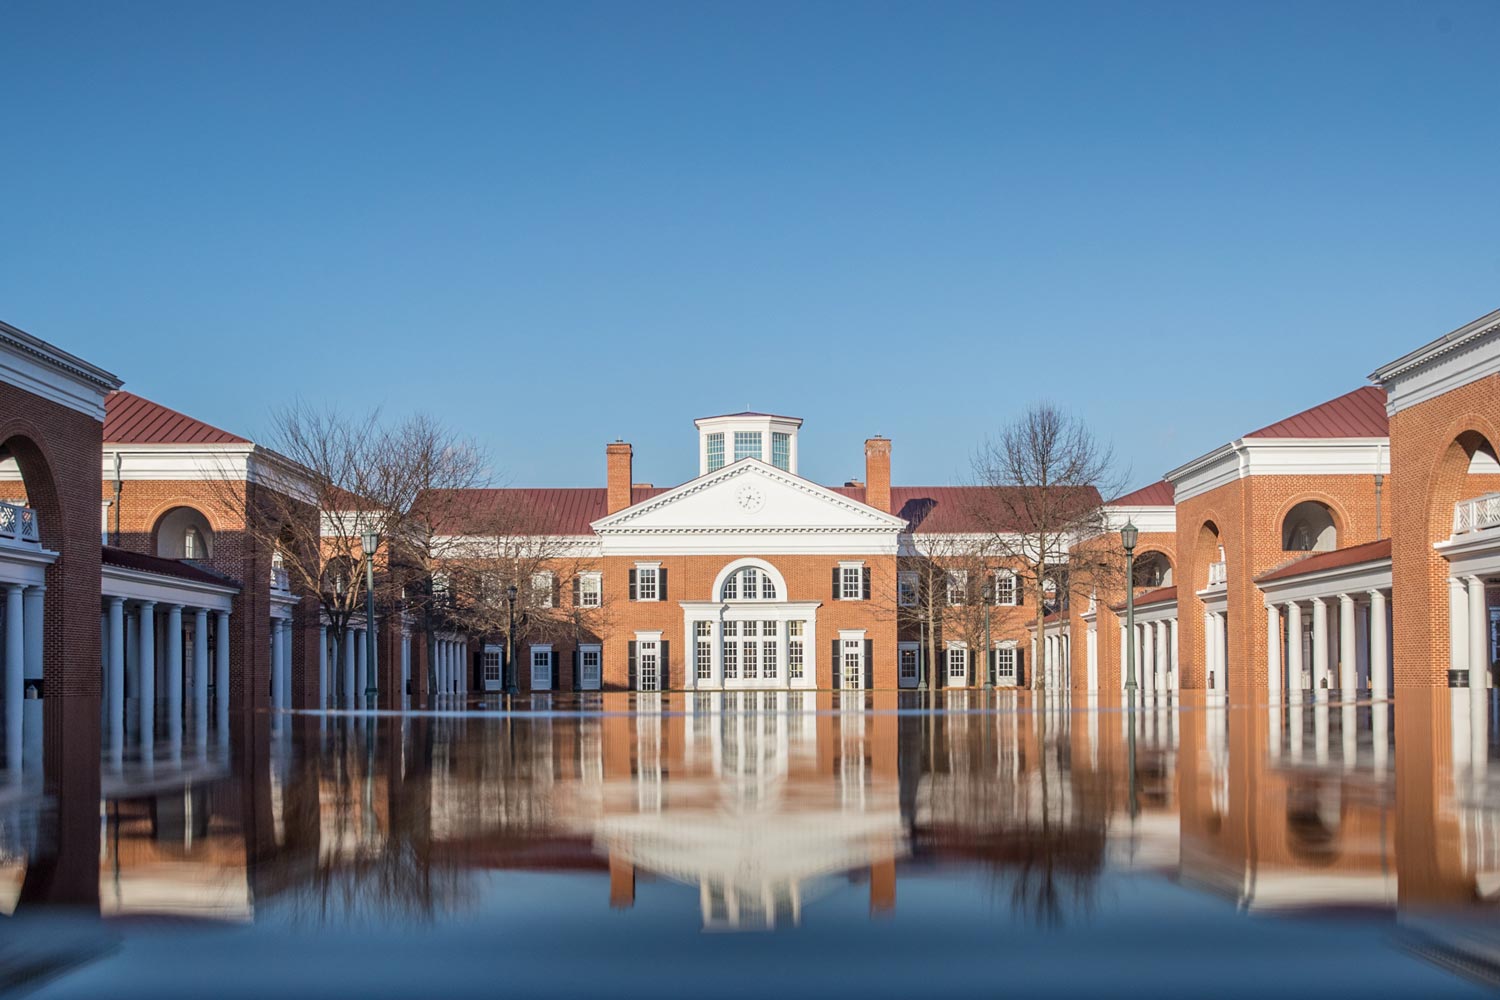 The Darden School of Business reflection fountain between the brick buildings